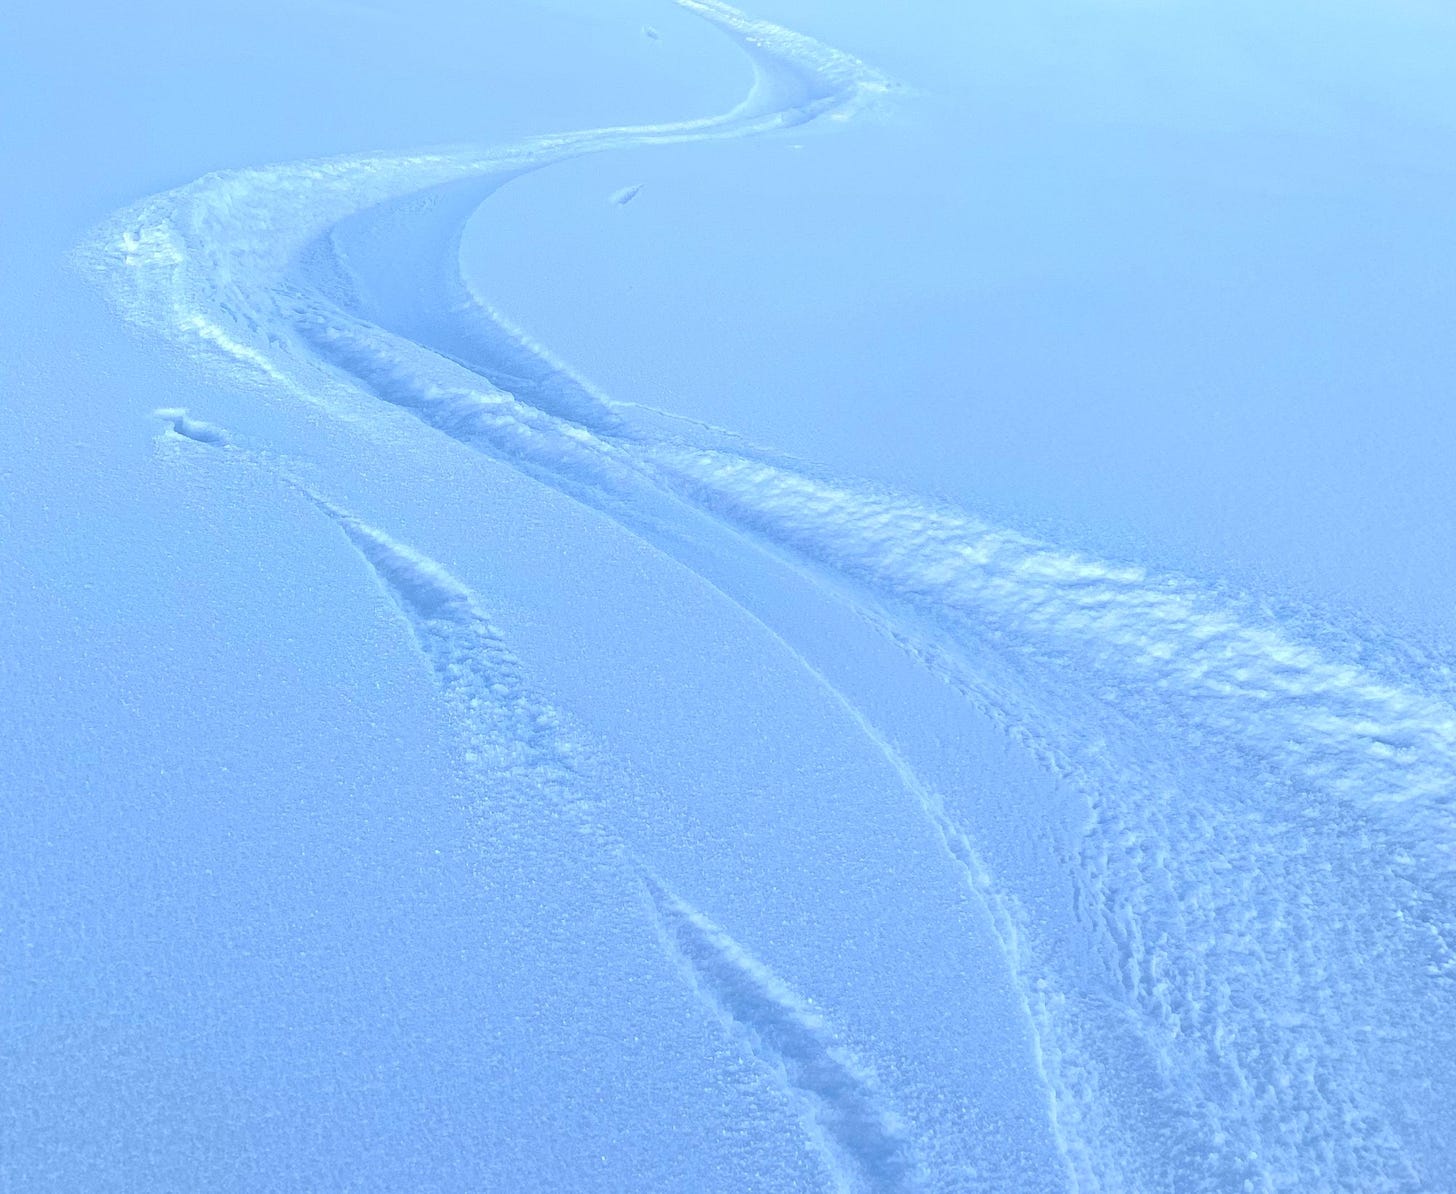 How to learn to ski as a complete beginner